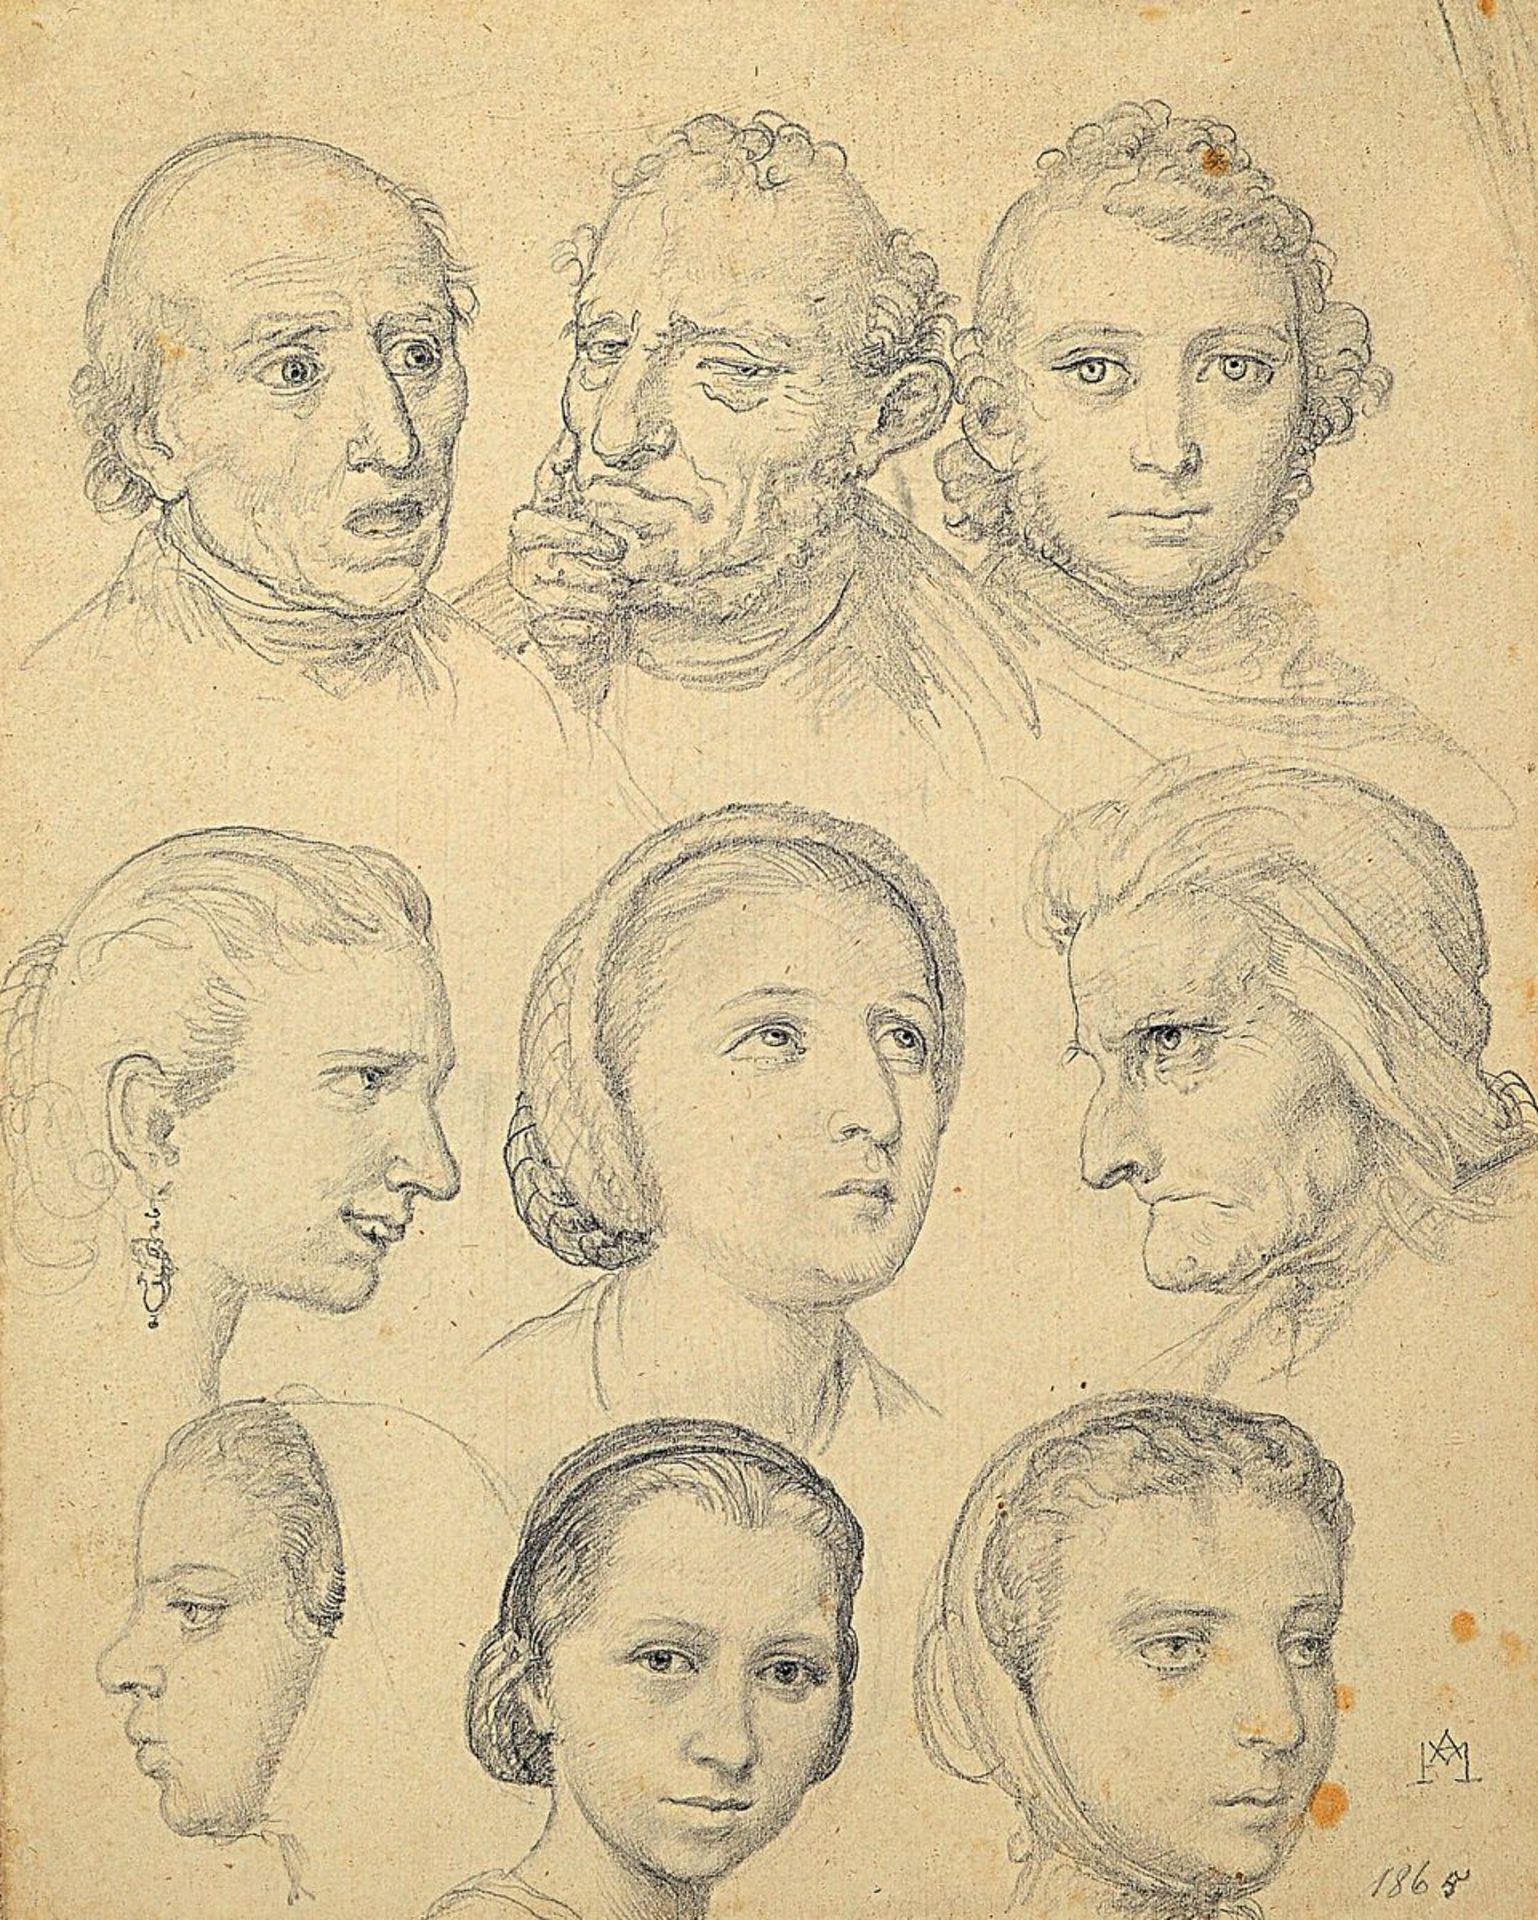 Andreas Müller, 1831-1901, student of Schraudolph, here: two sketch sheets with head studies, pencil